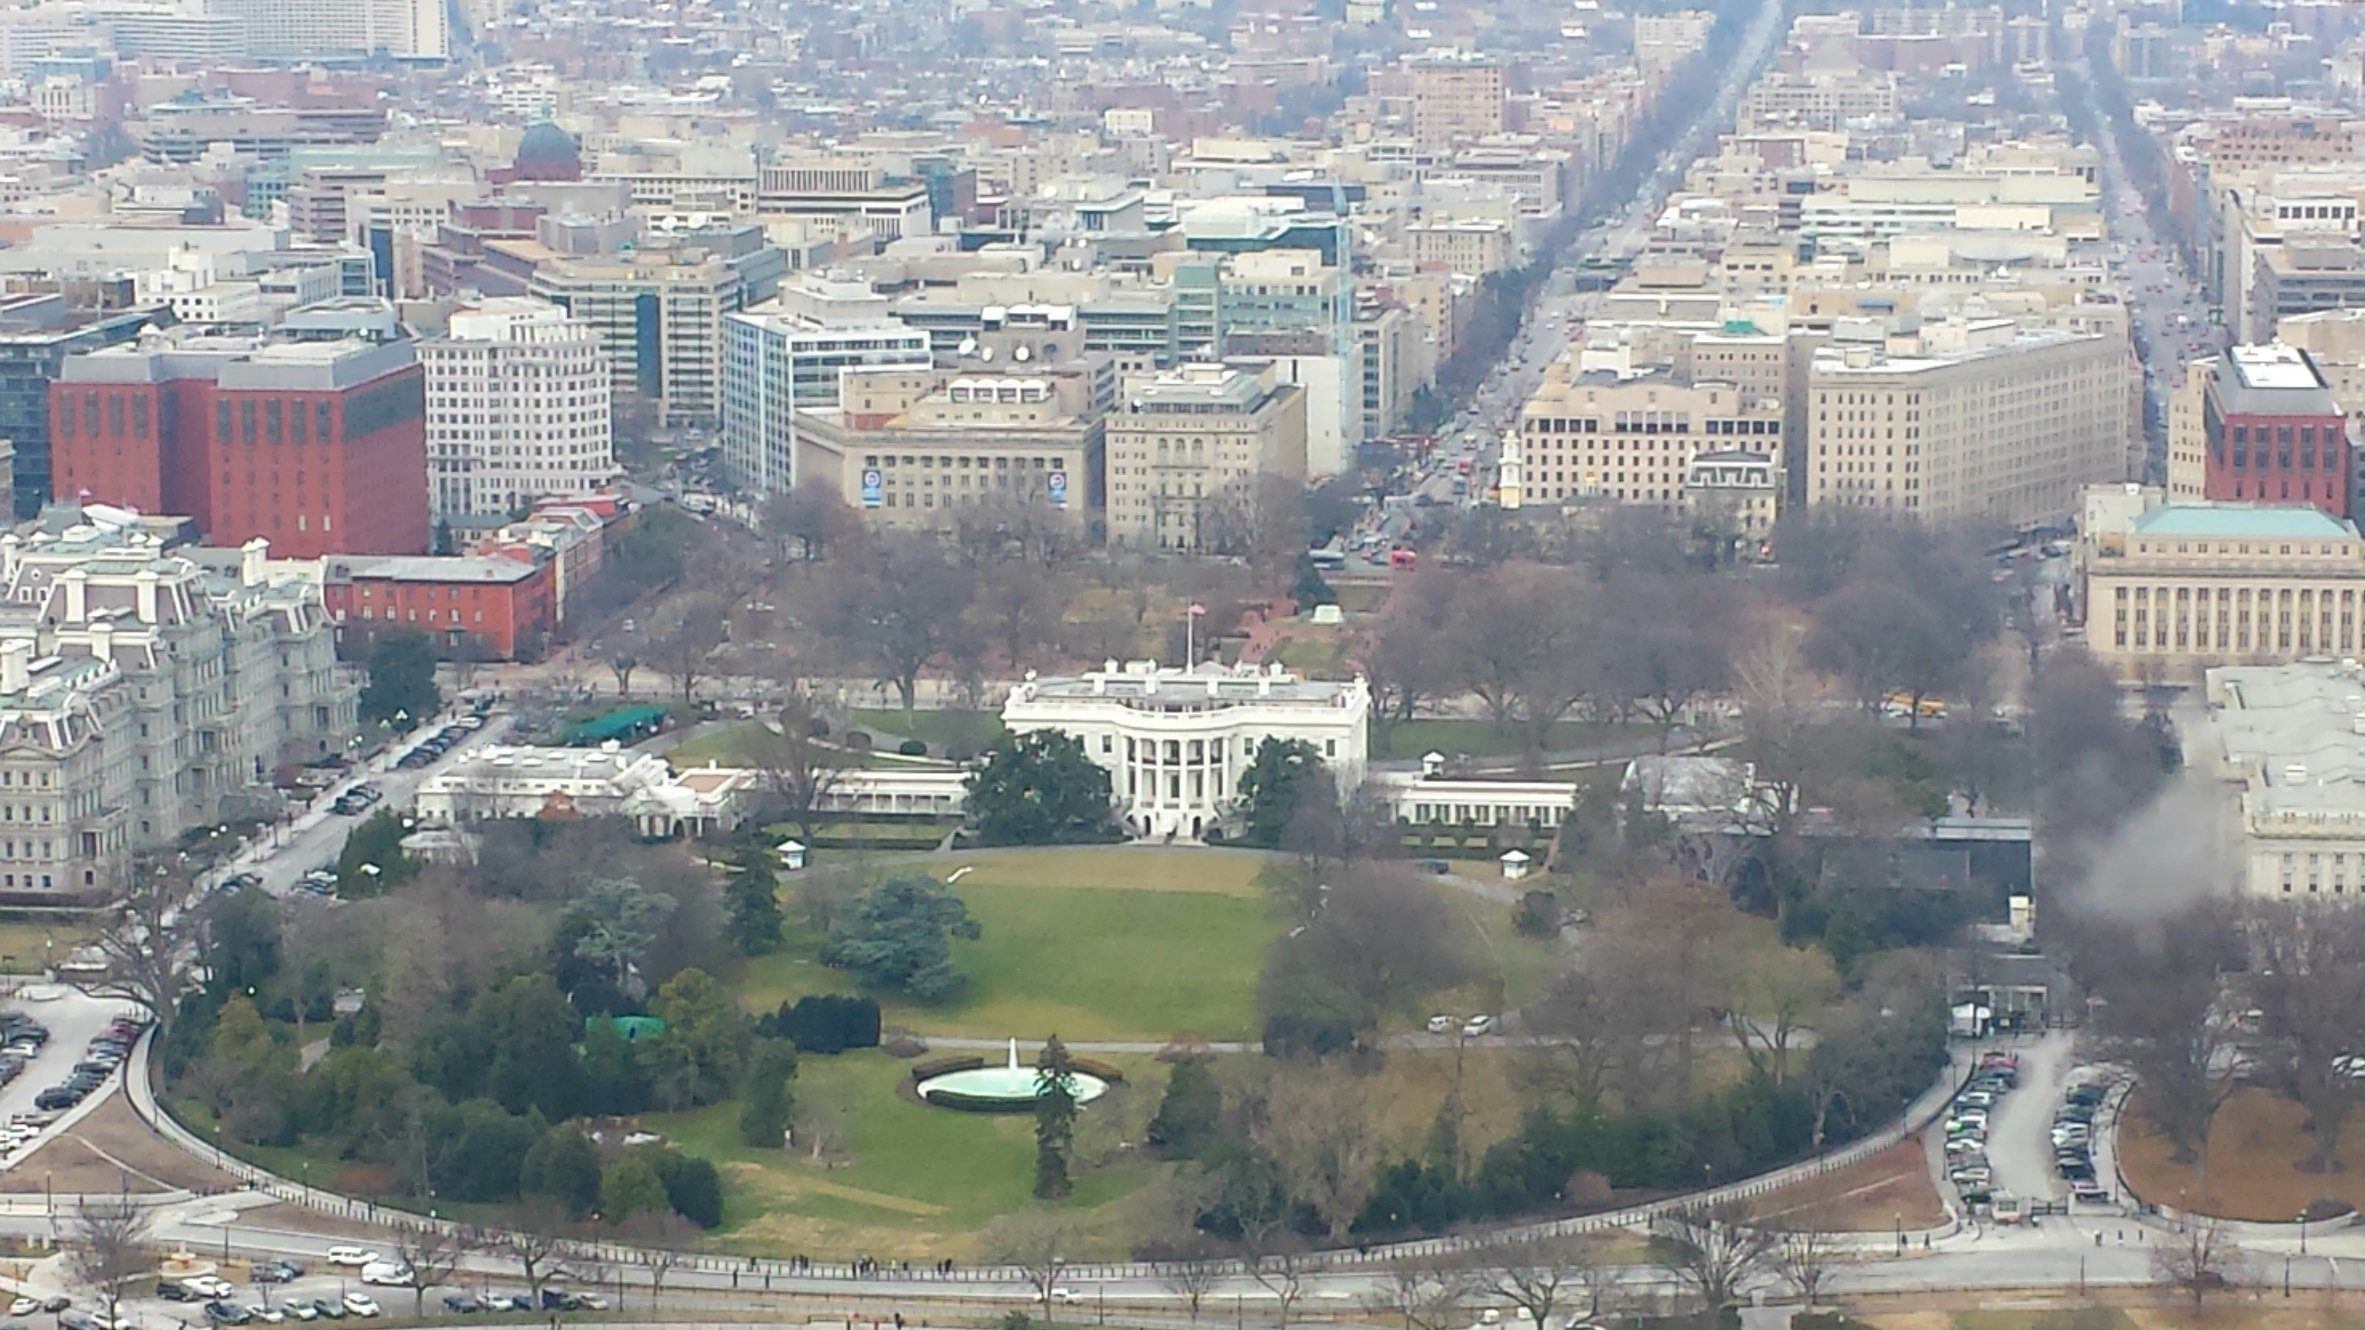 View of the White House from the Washington Monument in the National Mall, Washington DC